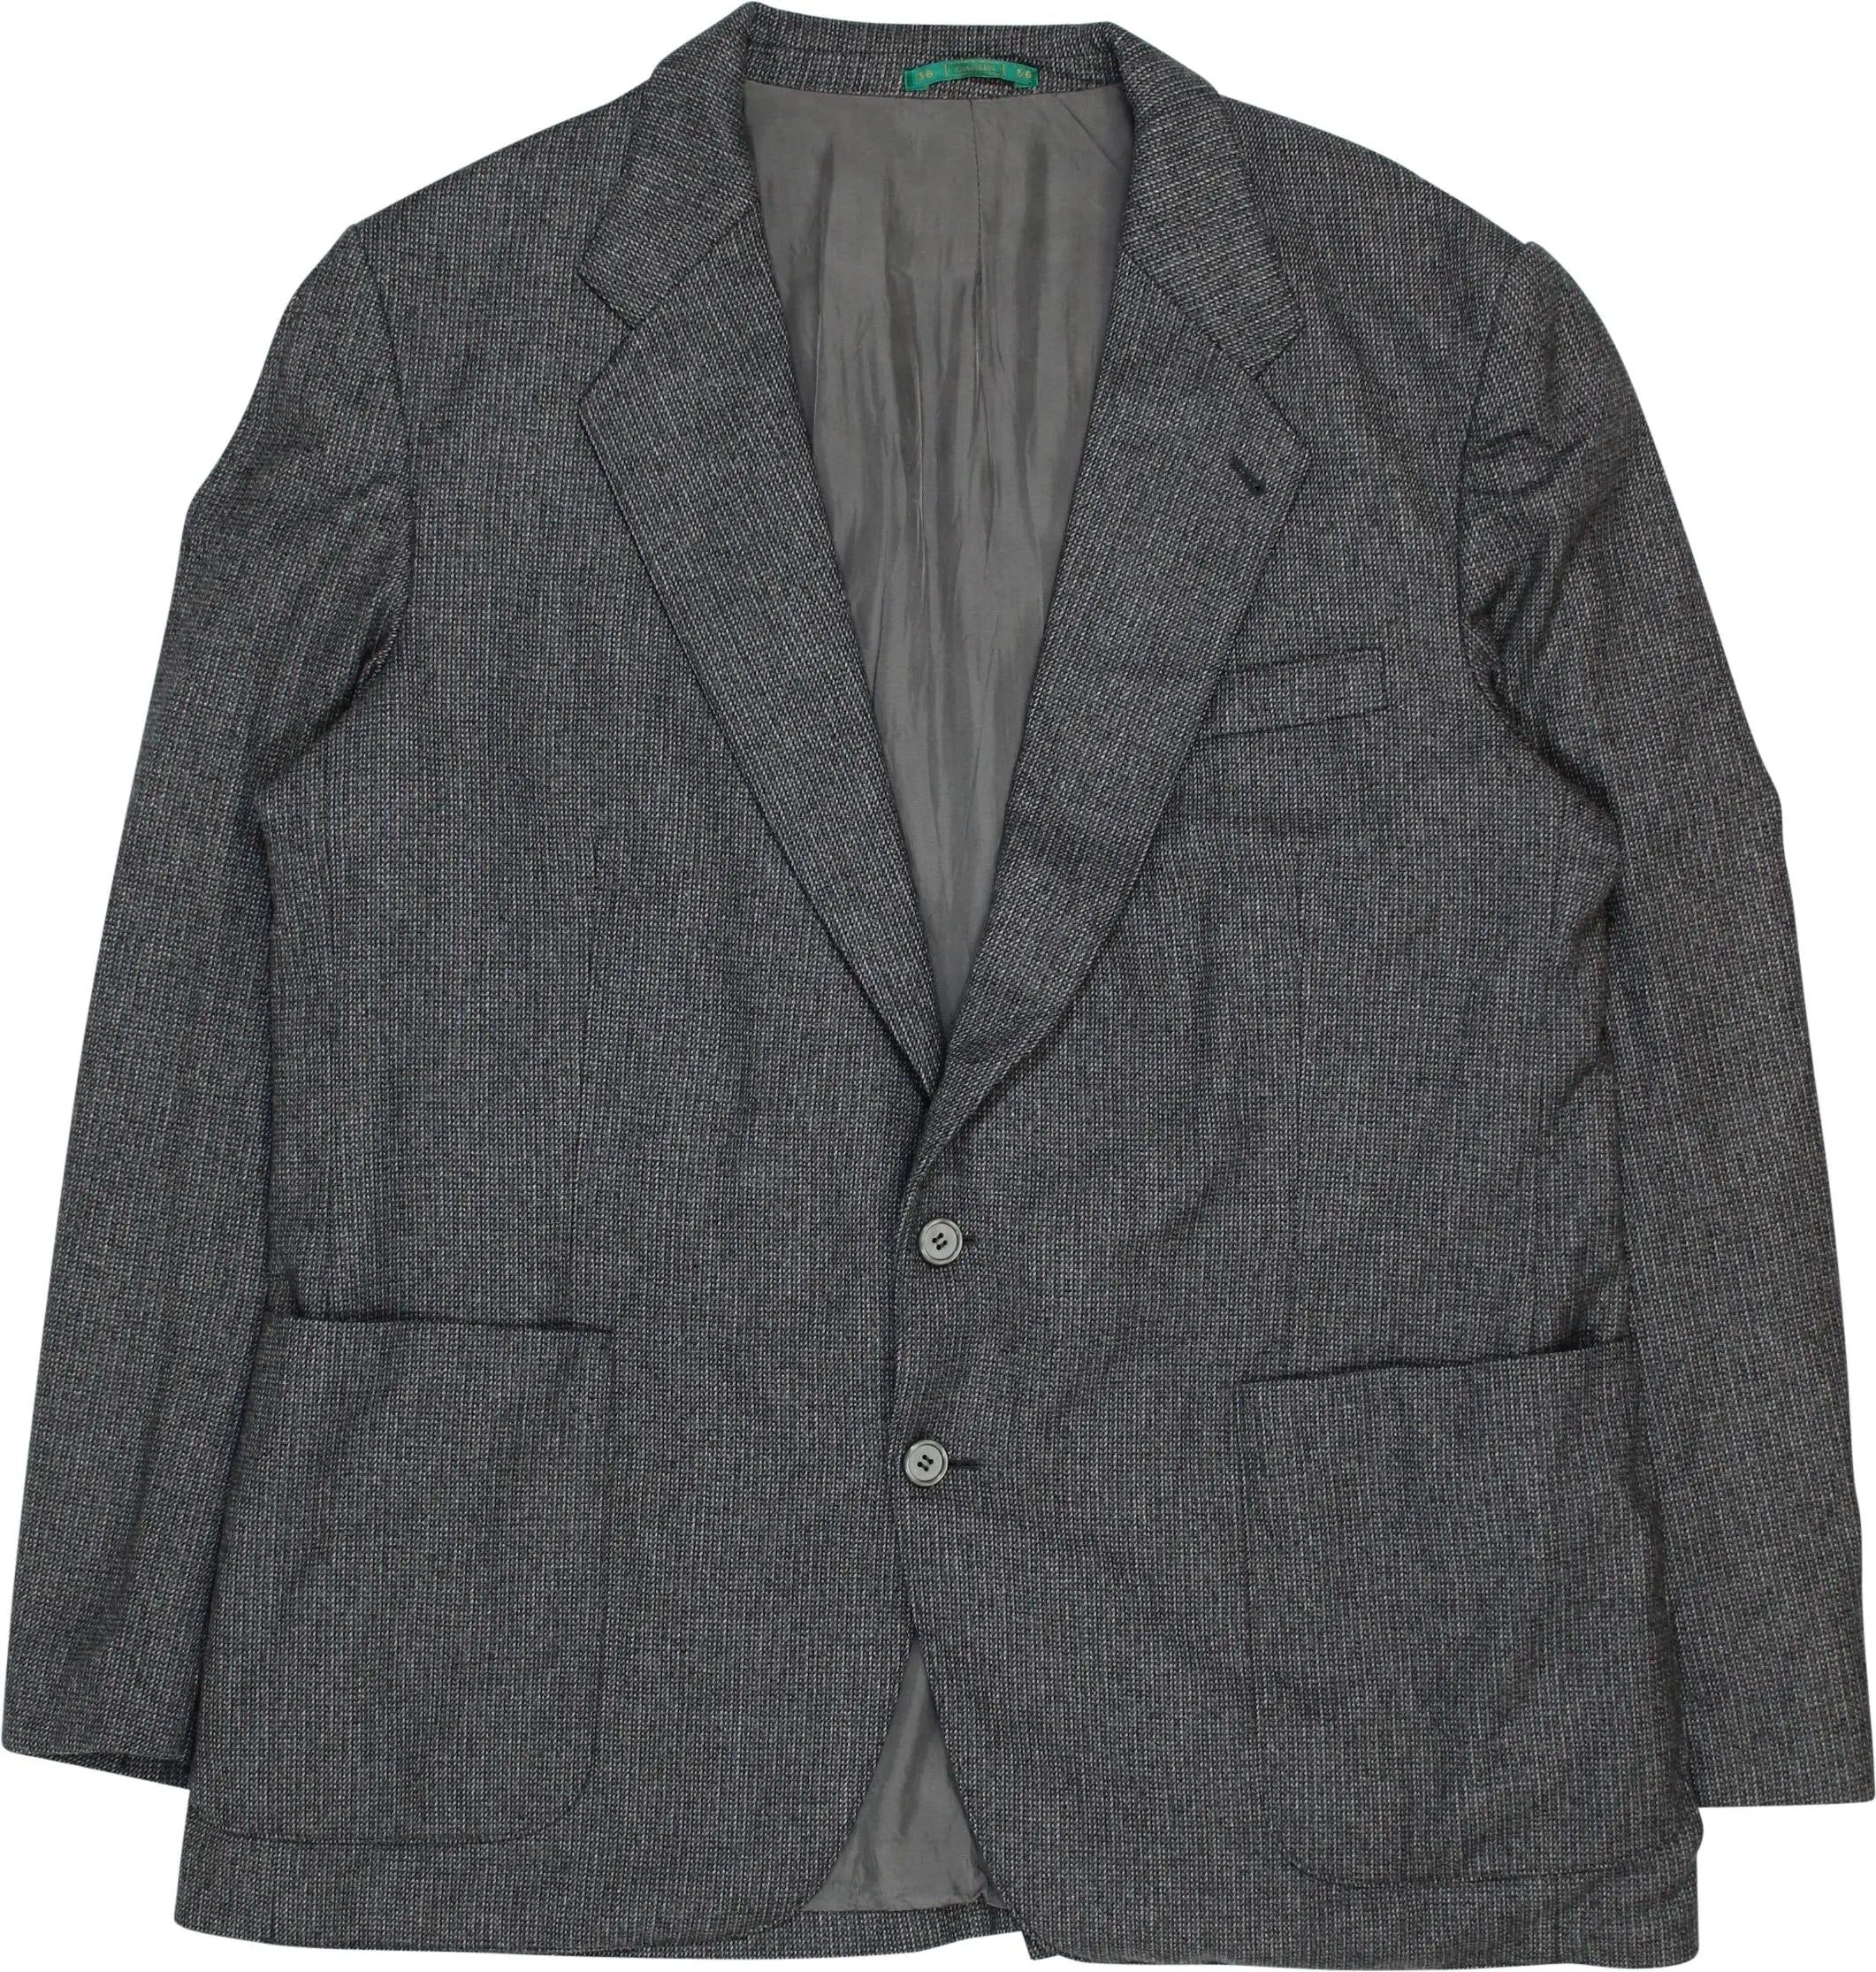 C&A - Grey Wool Blend Blazer- ThriftTale.com - Vintage and second handclothing